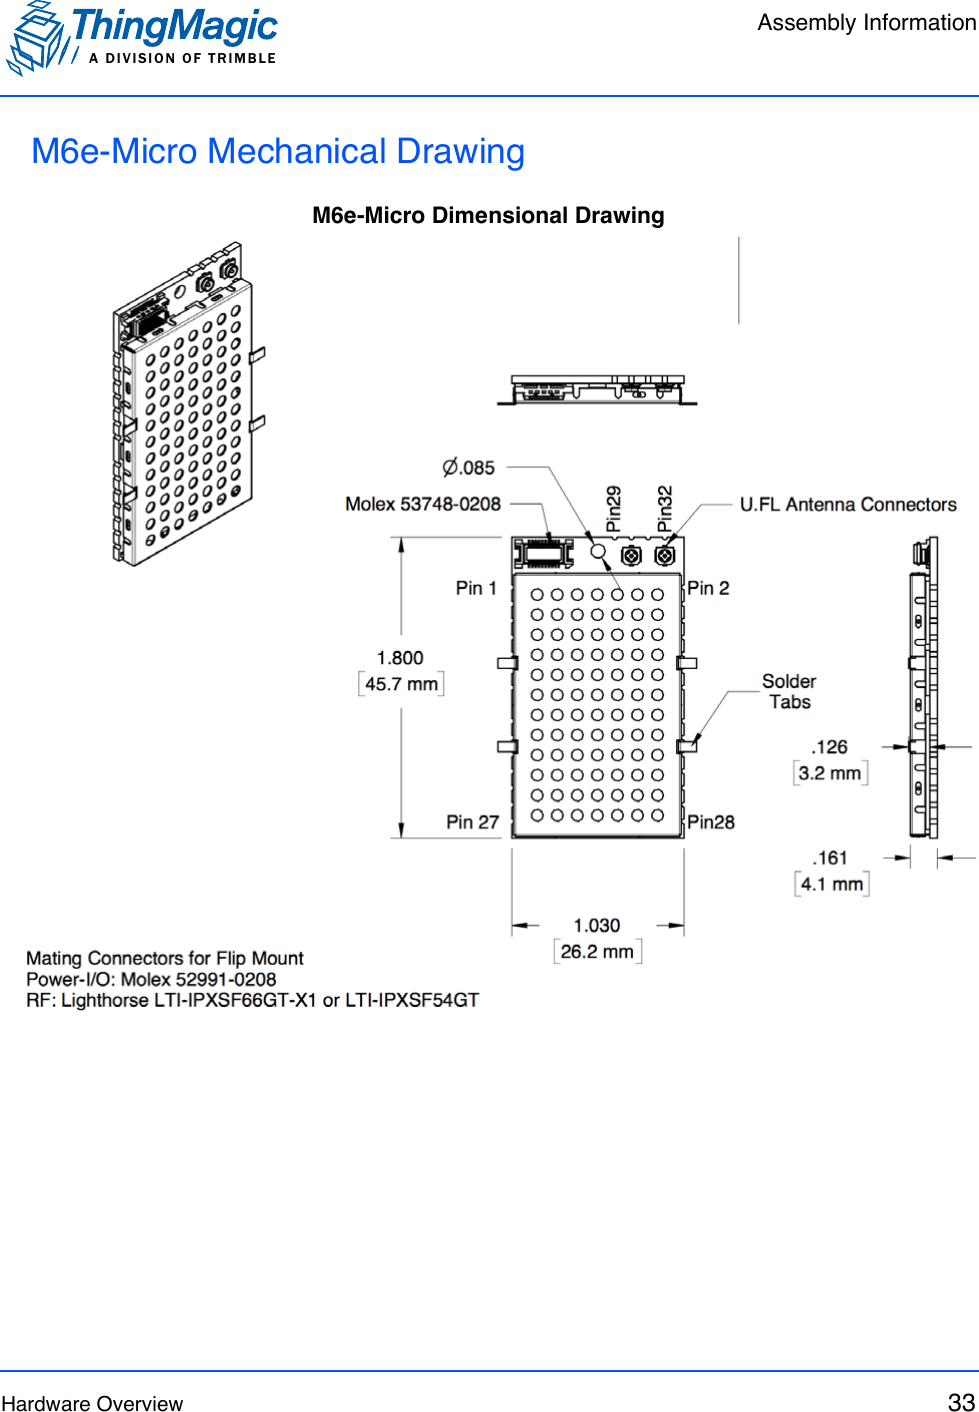 Assembly InformationA DIVISION OF TRIMBLEHardware Overview 33M6e-Micro Mechanical DrawingM6e-Micro Dimensional Drawing